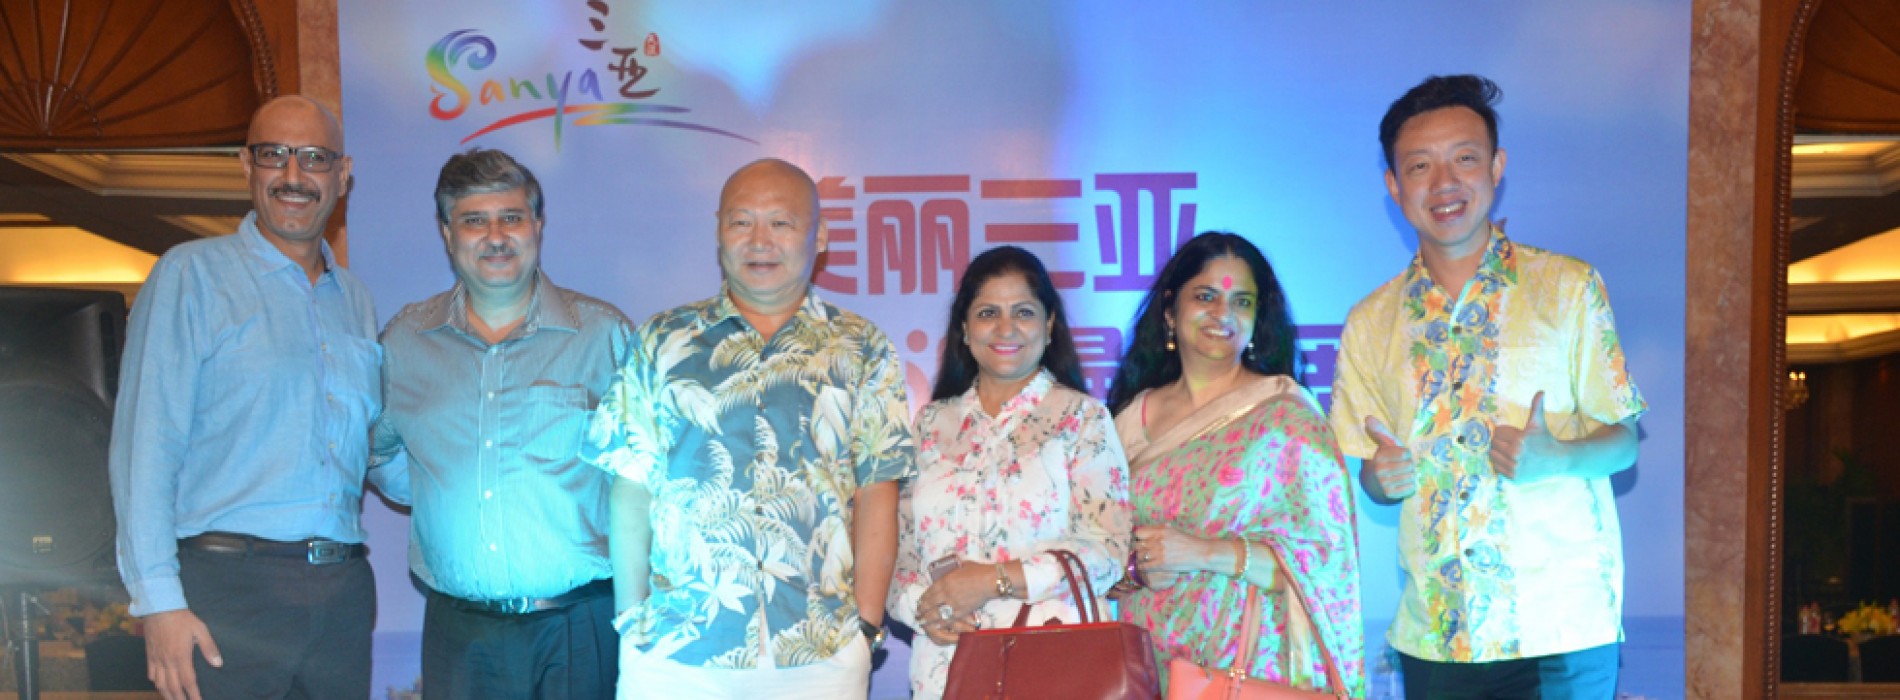 Sanya Tourism promotional and marketing event